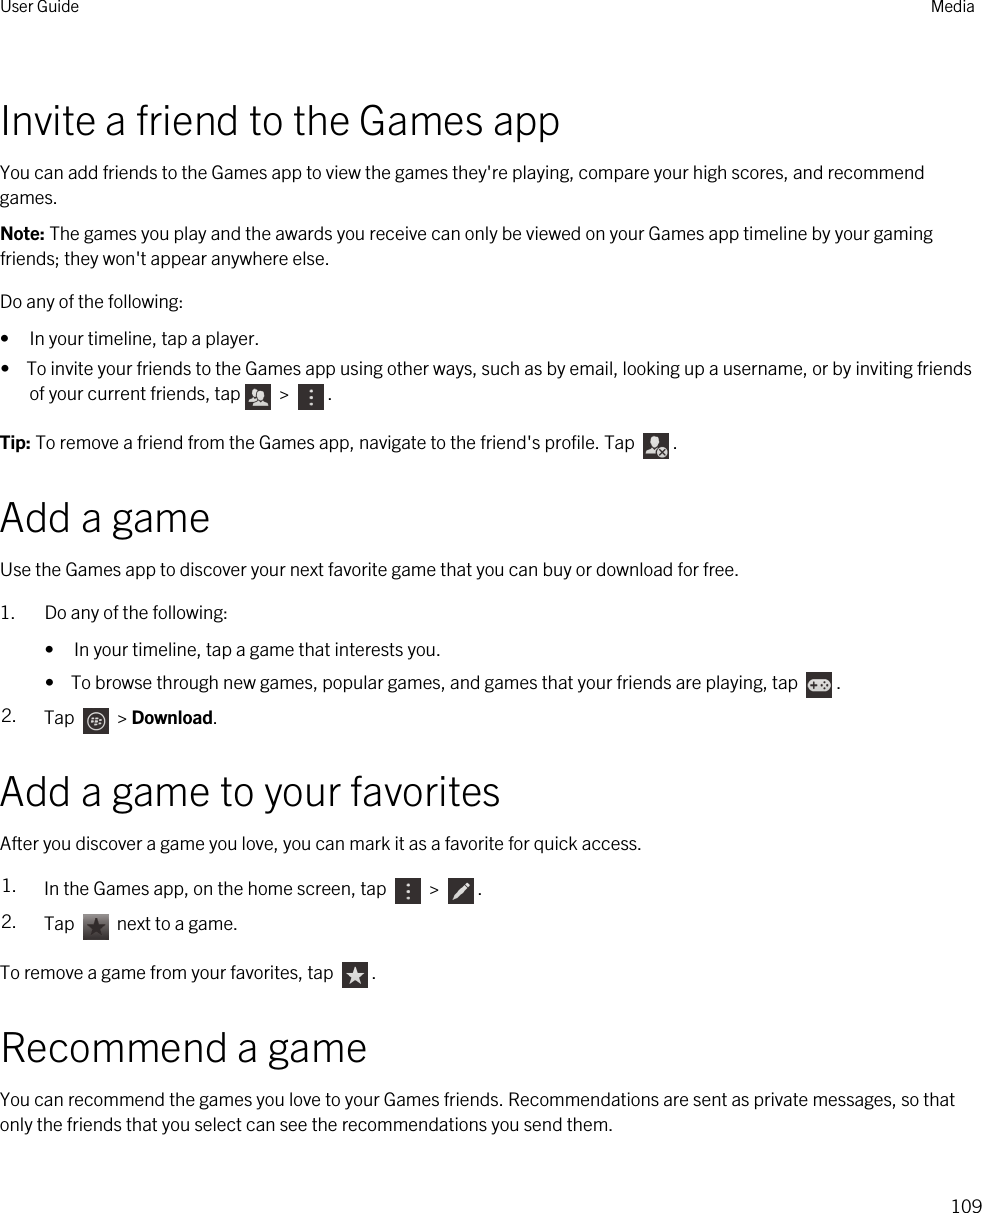 Invite a friend to the Games appYou can add friends to the Games app to view the games they&apos;re playing, compare your high scores, and recommend games.Note: The games you play and the awards you receive can only be viewed on your Games app timeline by your gaming friends; they won&apos;t appear anywhere else.Do any of the following:• In your timeline, tap a player.•  To invite your friends to the Games app using other ways, such as by email, looking up a username, or by inviting friends of your current friends, tap  &gt;  .Tip: To remove a friend from the Games app, navigate to the friend&apos;s profile. Tap  .Add a gameUse the Games app to discover your next favorite game that you can buy or download for free.1. Do any of the following:• In your timeline, tap a game that interests you.•  To browse through new games, popular games, and games that your friends are playing, tap  .2. Tap   &gt; Download.Add a game to your favoritesAfter you discover a game you love, you can mark it as a favorite for quick access.1. In the Games app, on the home screen, tap   &gt;  .2. Tap   next to a game.To remove a game from your favorites, tap  .Recommend a gameYou can recommend the games you love to your Games friends. Recommendations are sent as private messages, so that only the friends that you select can see the recommendations you send them.User Guide Media109